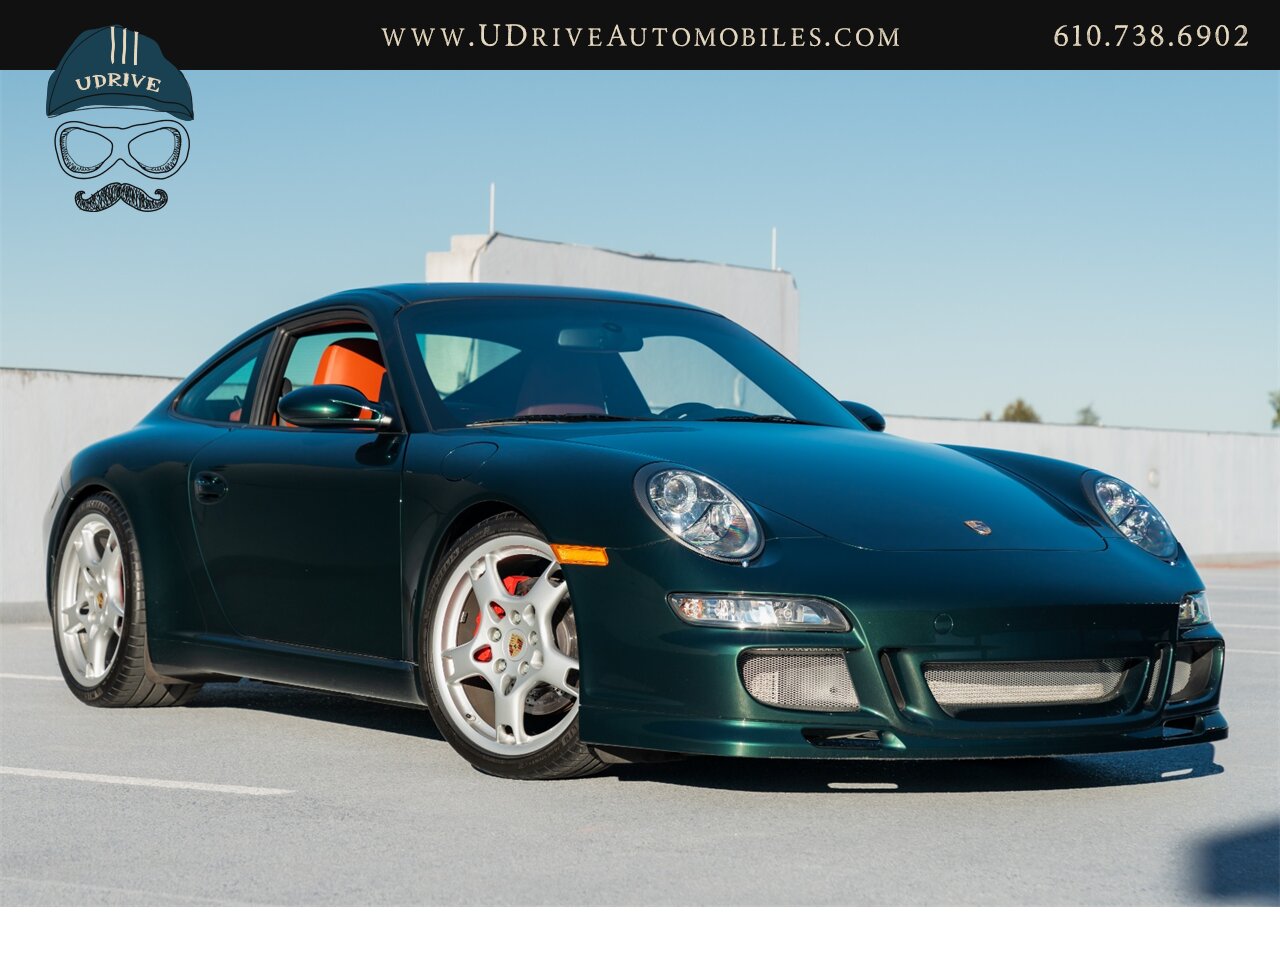 2007 Porsche 911 Carrera S 6Spd 997S RARE X51 Power Kit 381hp  1 of a Kind Forest Green over Blk/Terracotta Chrono Adap Sport Sts $113k MSRP - Photo 4 - West Chester, PA 19382